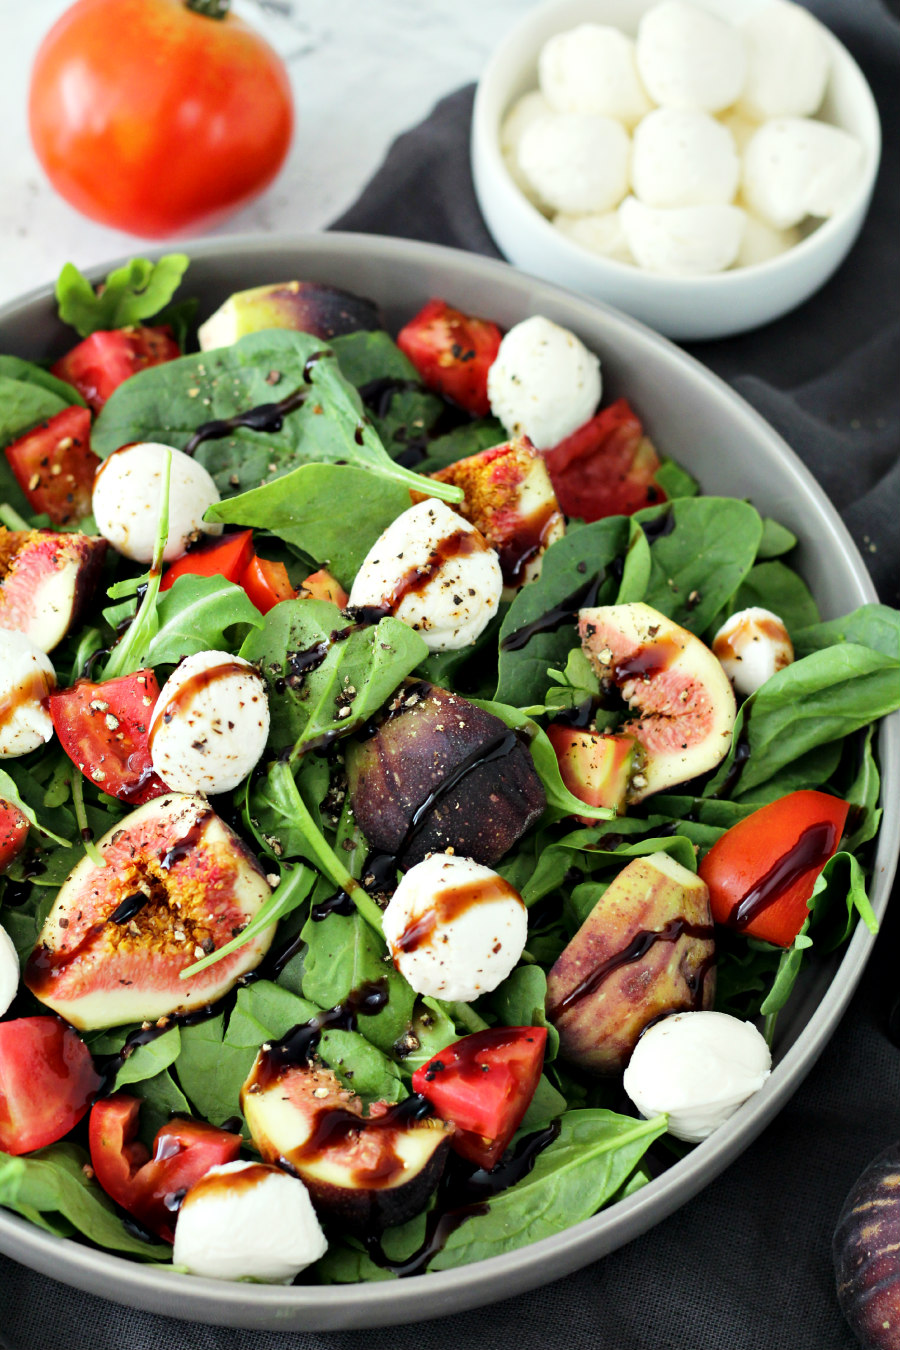 Trader Joe's Inspired Black Fig and Balsamic Salad with tomato and fresh mozzarella balls also sitting in photo.